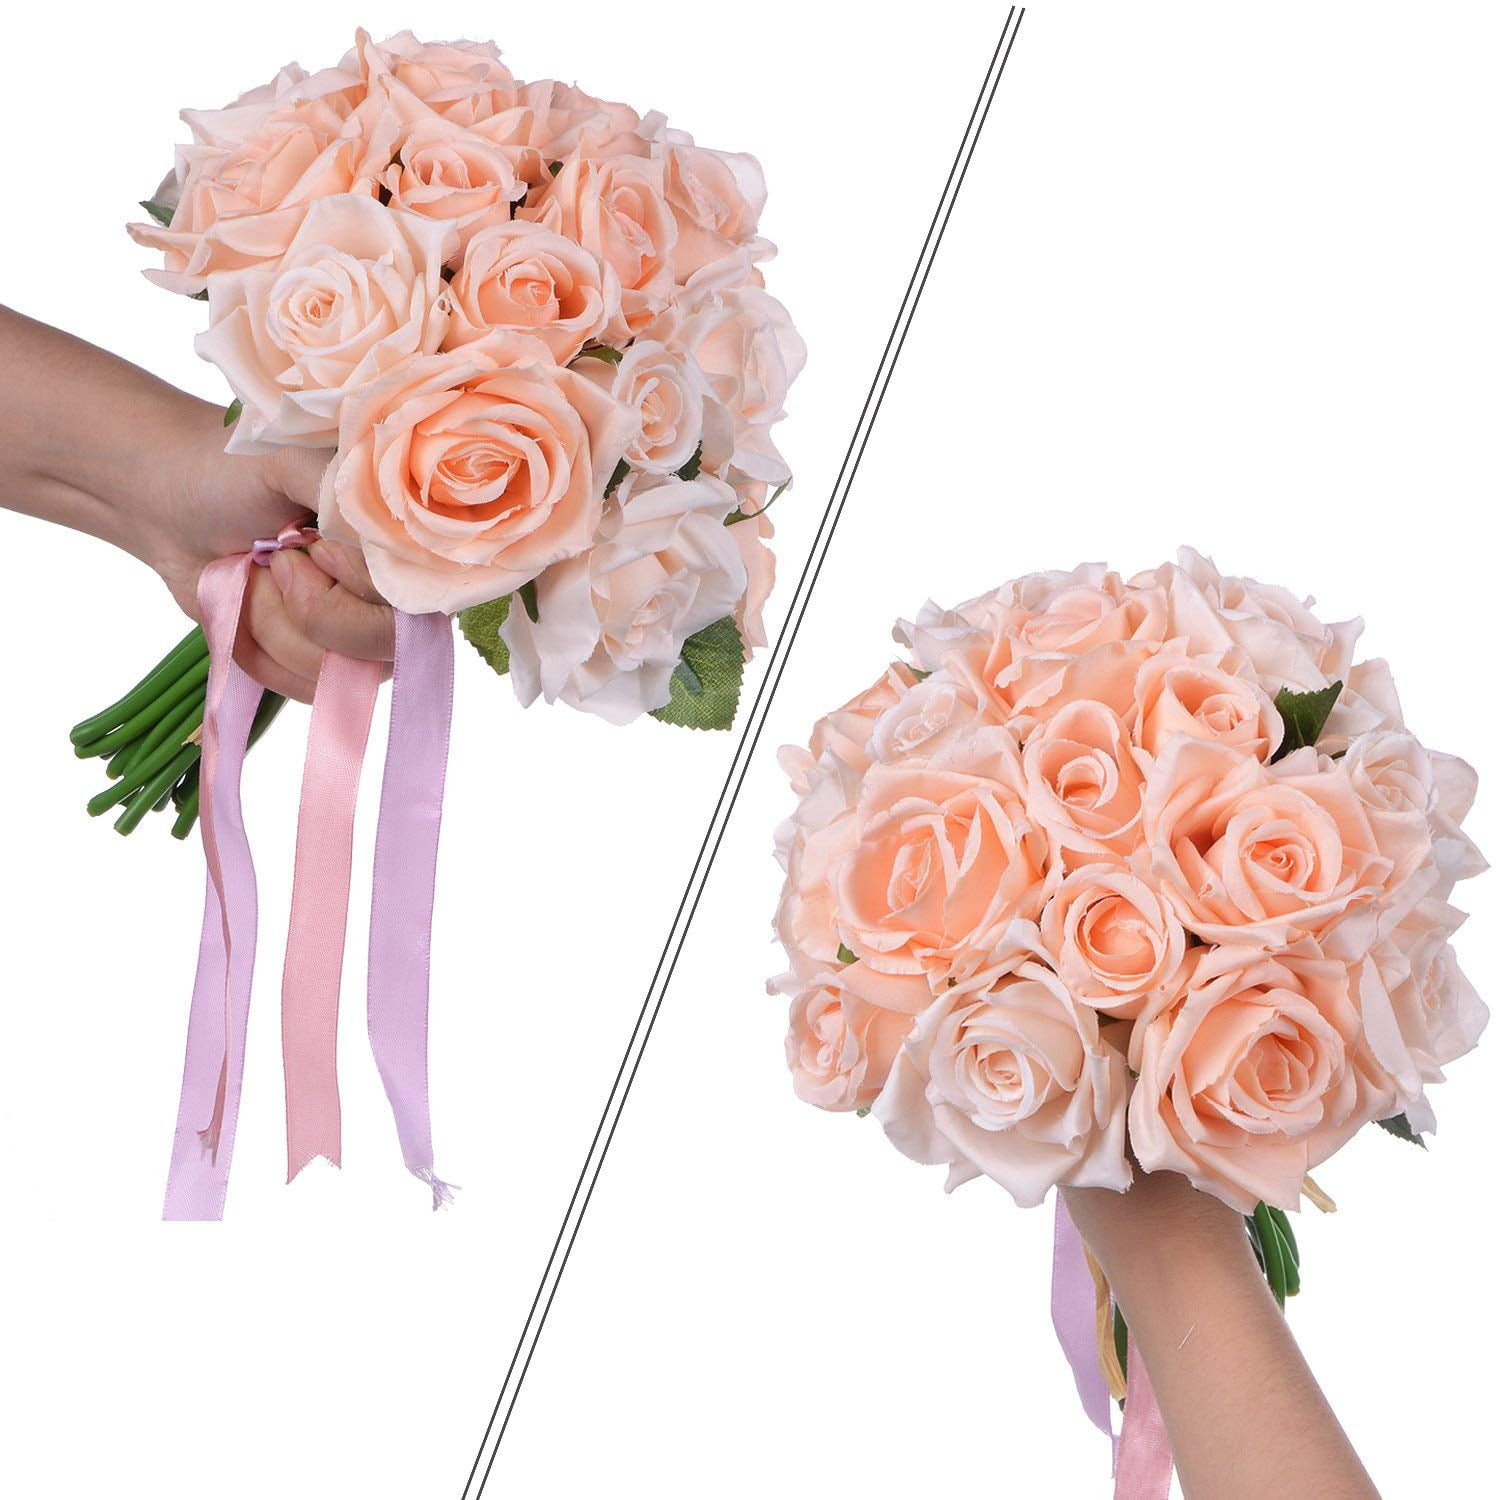 Homcomodar Artificial Flowers Champagne Rose 30pcs Real Looking Fake Roses with Stem for Wedding DIY Bouquets Centerpieces Arrangement Party Home Décor 